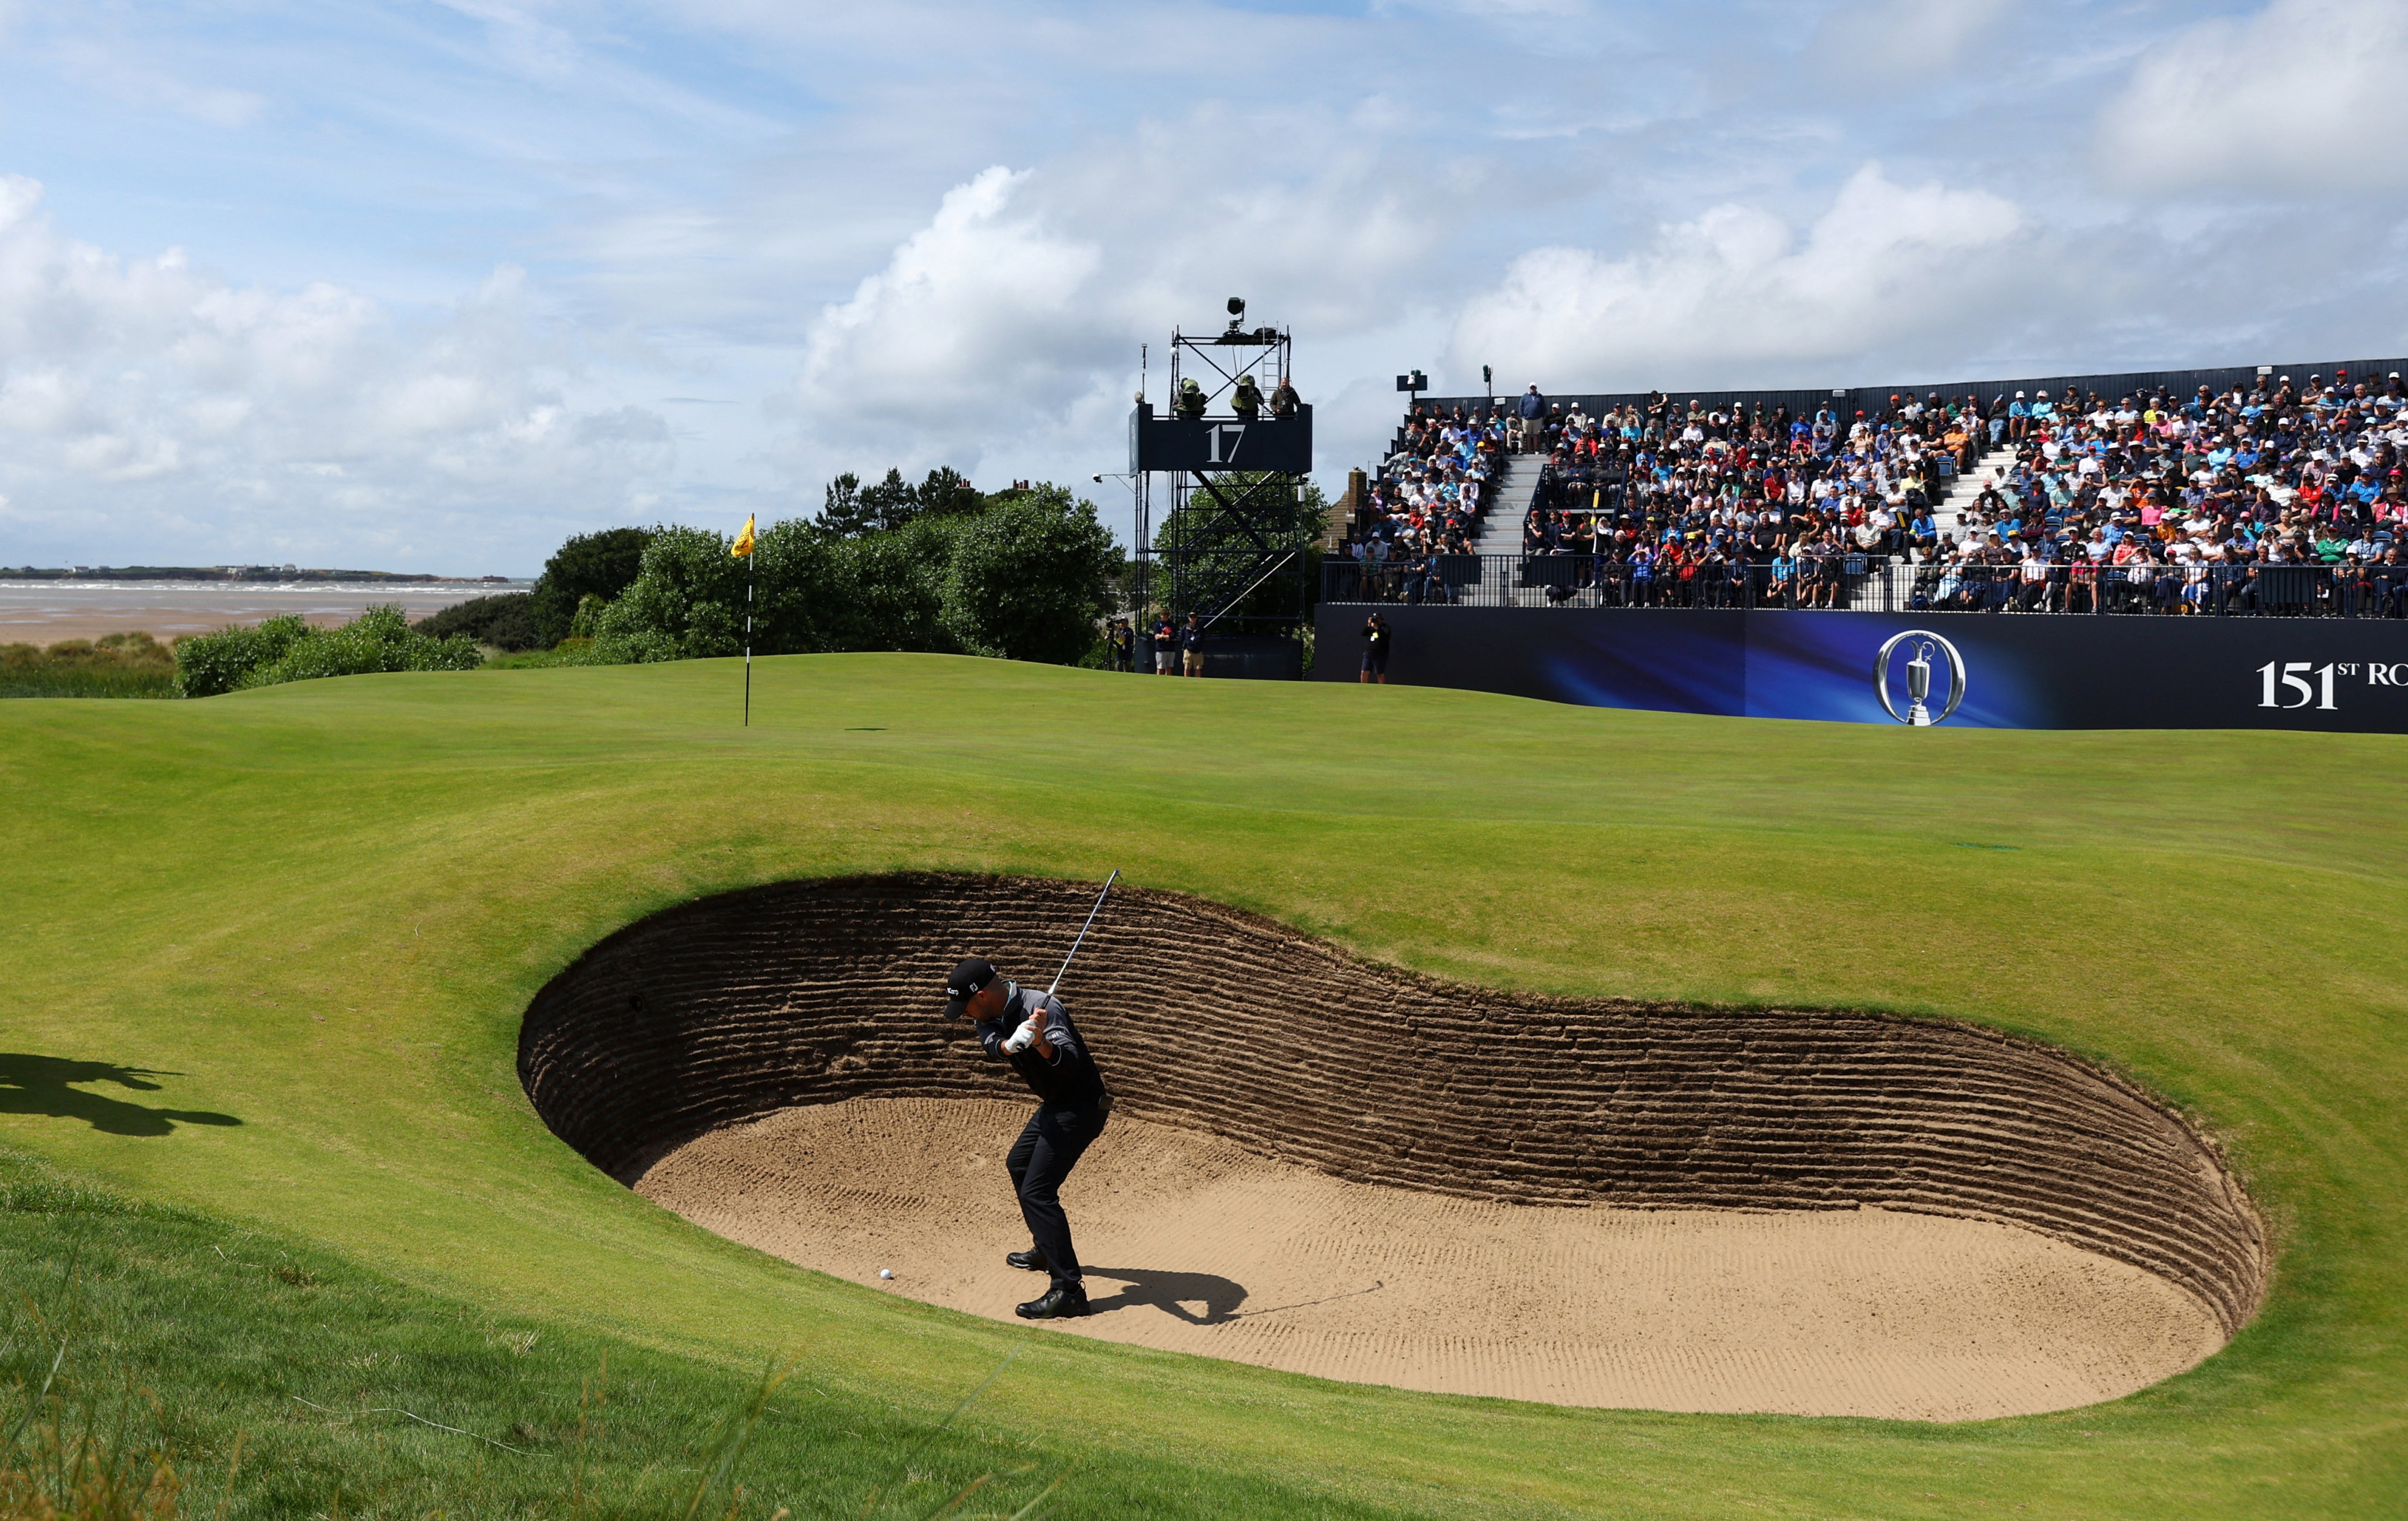 Brian Harman plays out of a bunker on the 17th hole during the second round of The Open Championship. Photo: Reuters